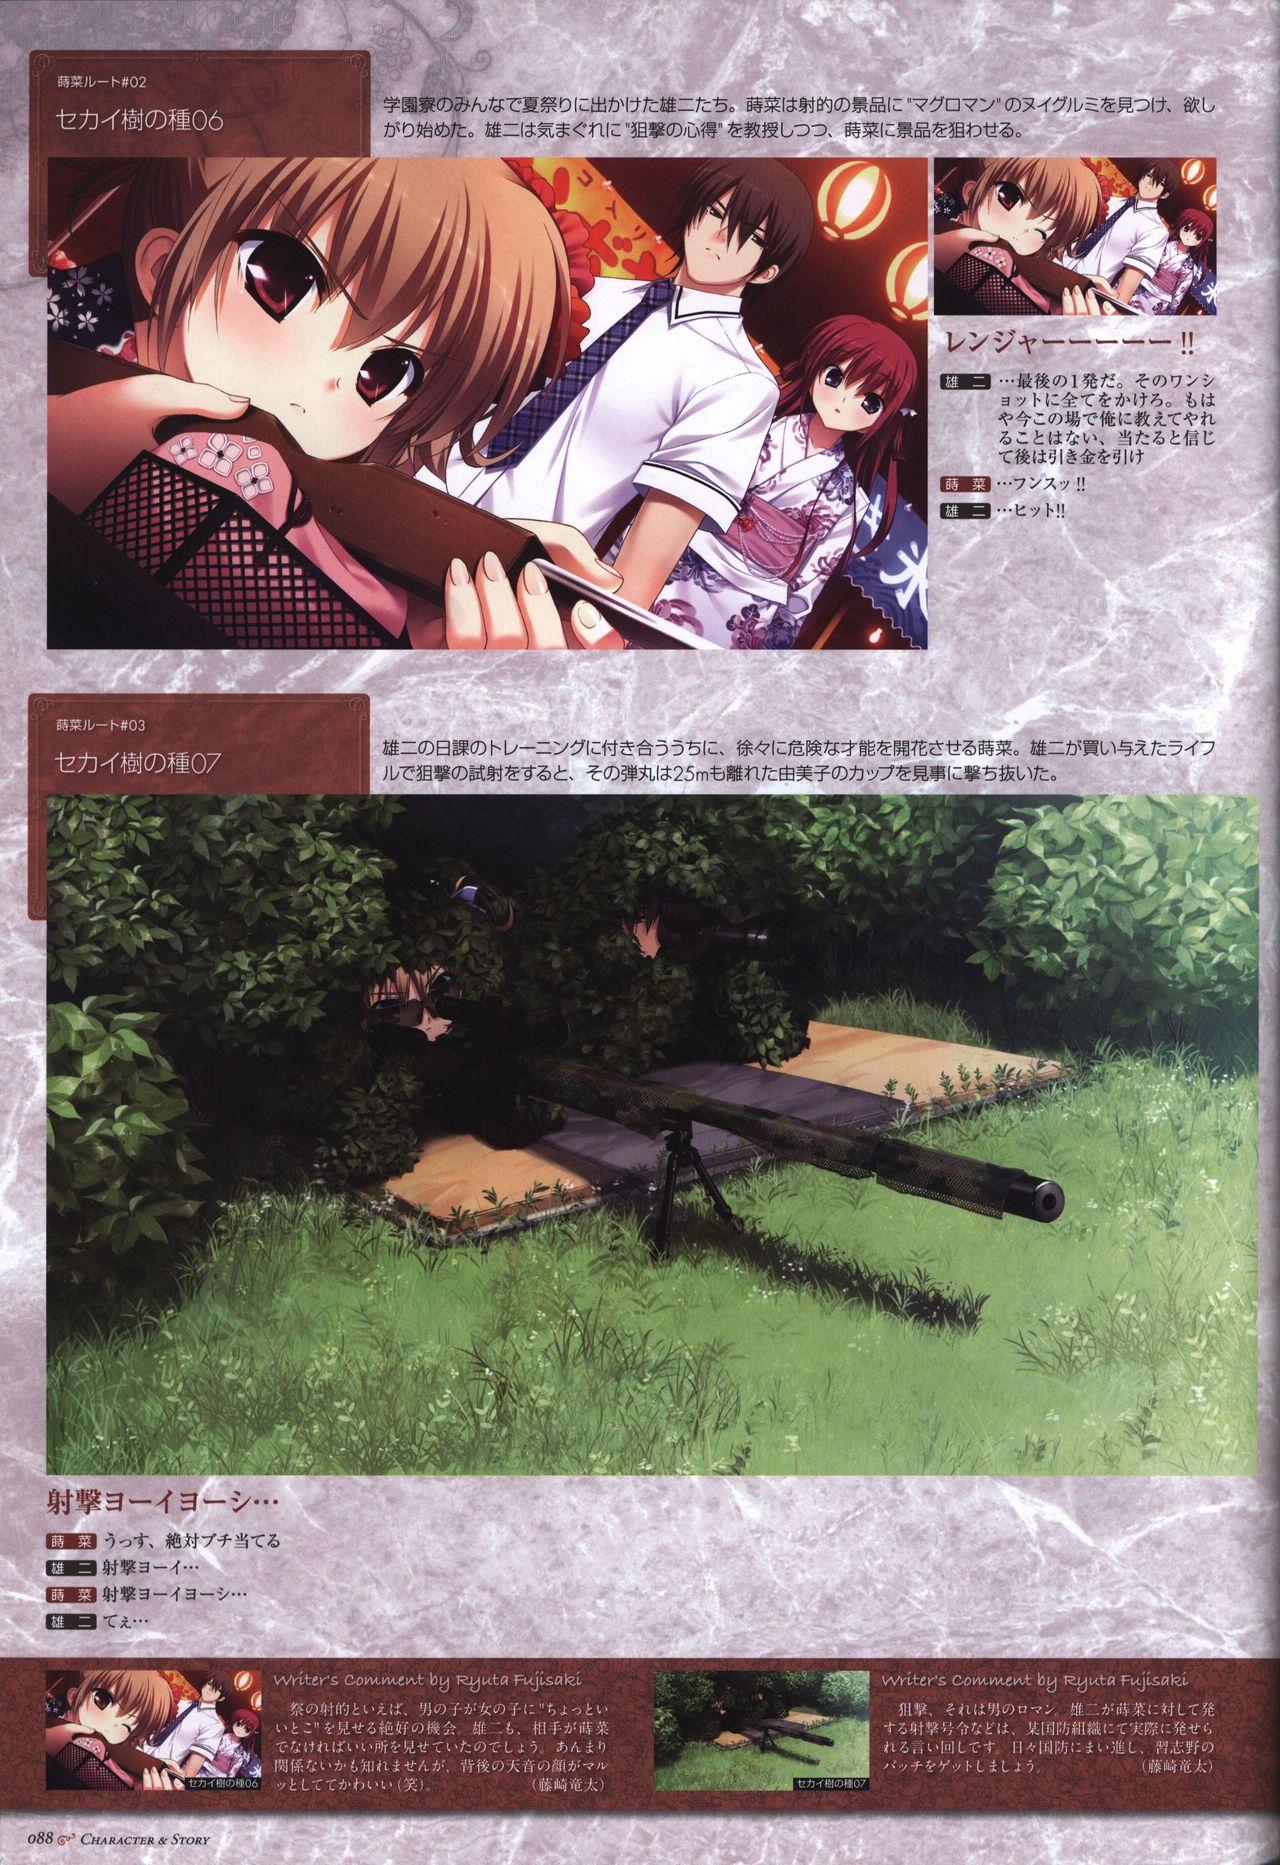 The Fruit of Grisaia Visual FanBook 88